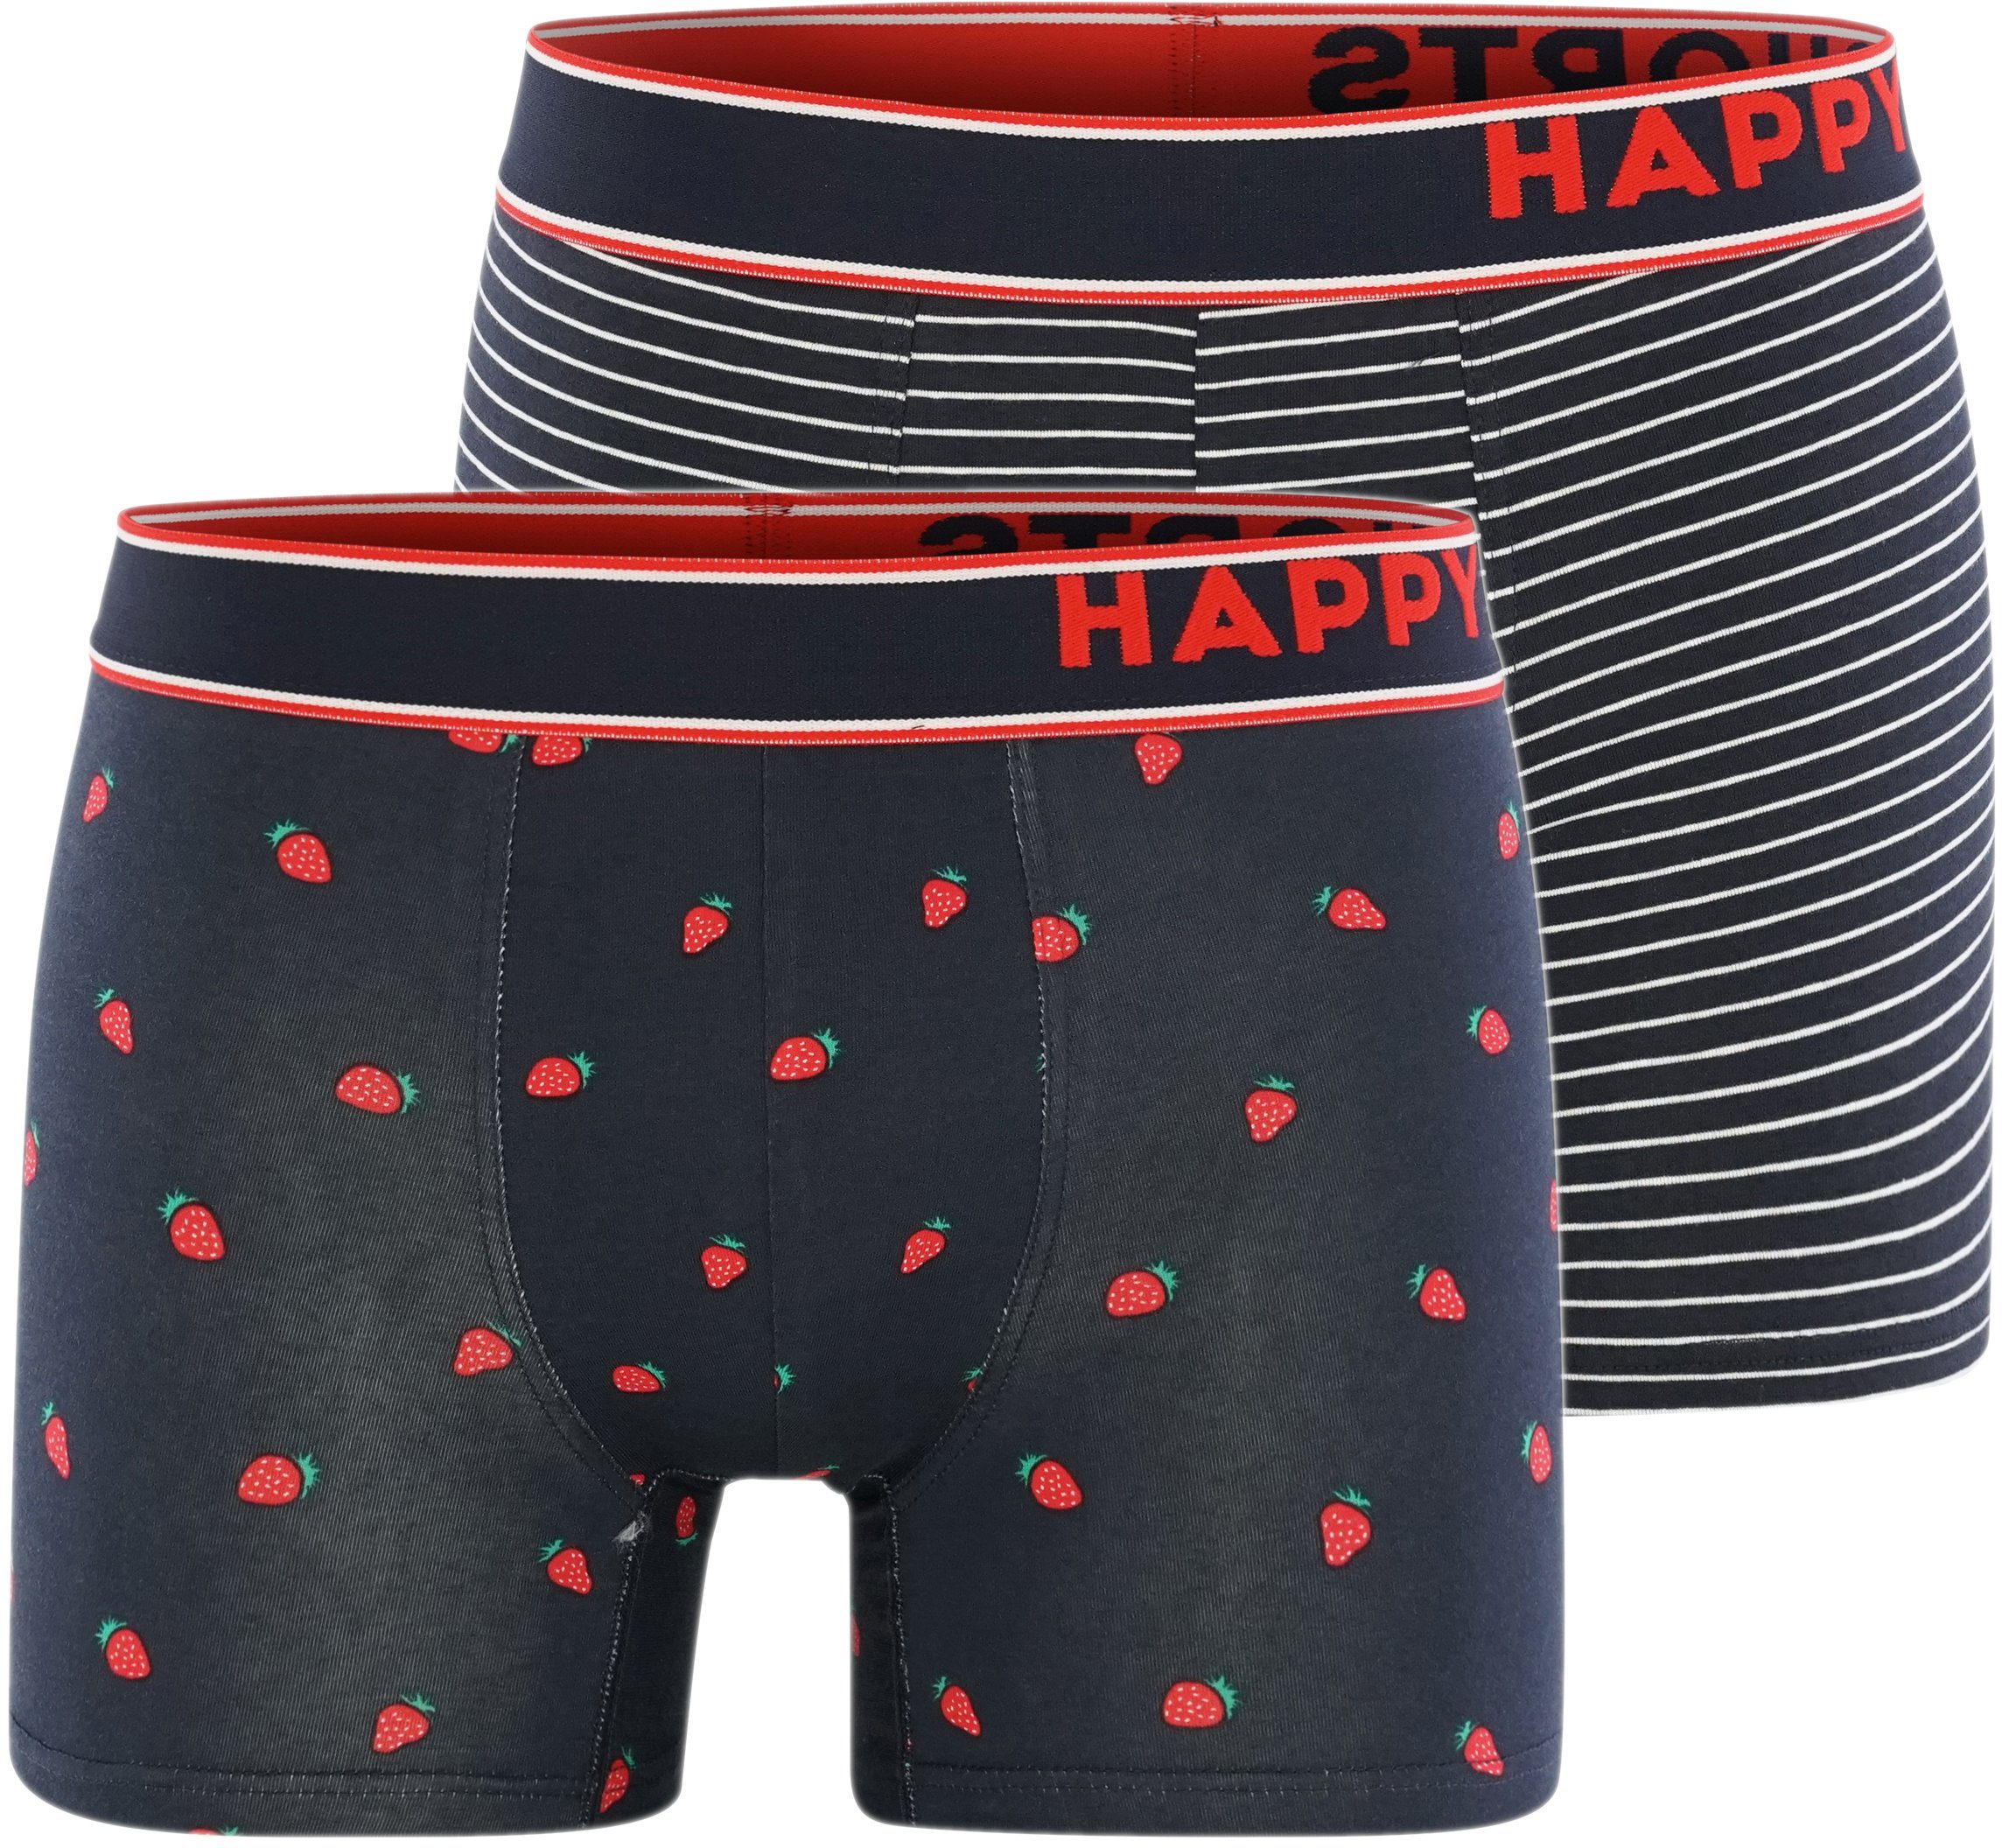 HAPPY SHORTS Retro Pants 2-Pack and Trunks Stripe Strawberries (2-St)